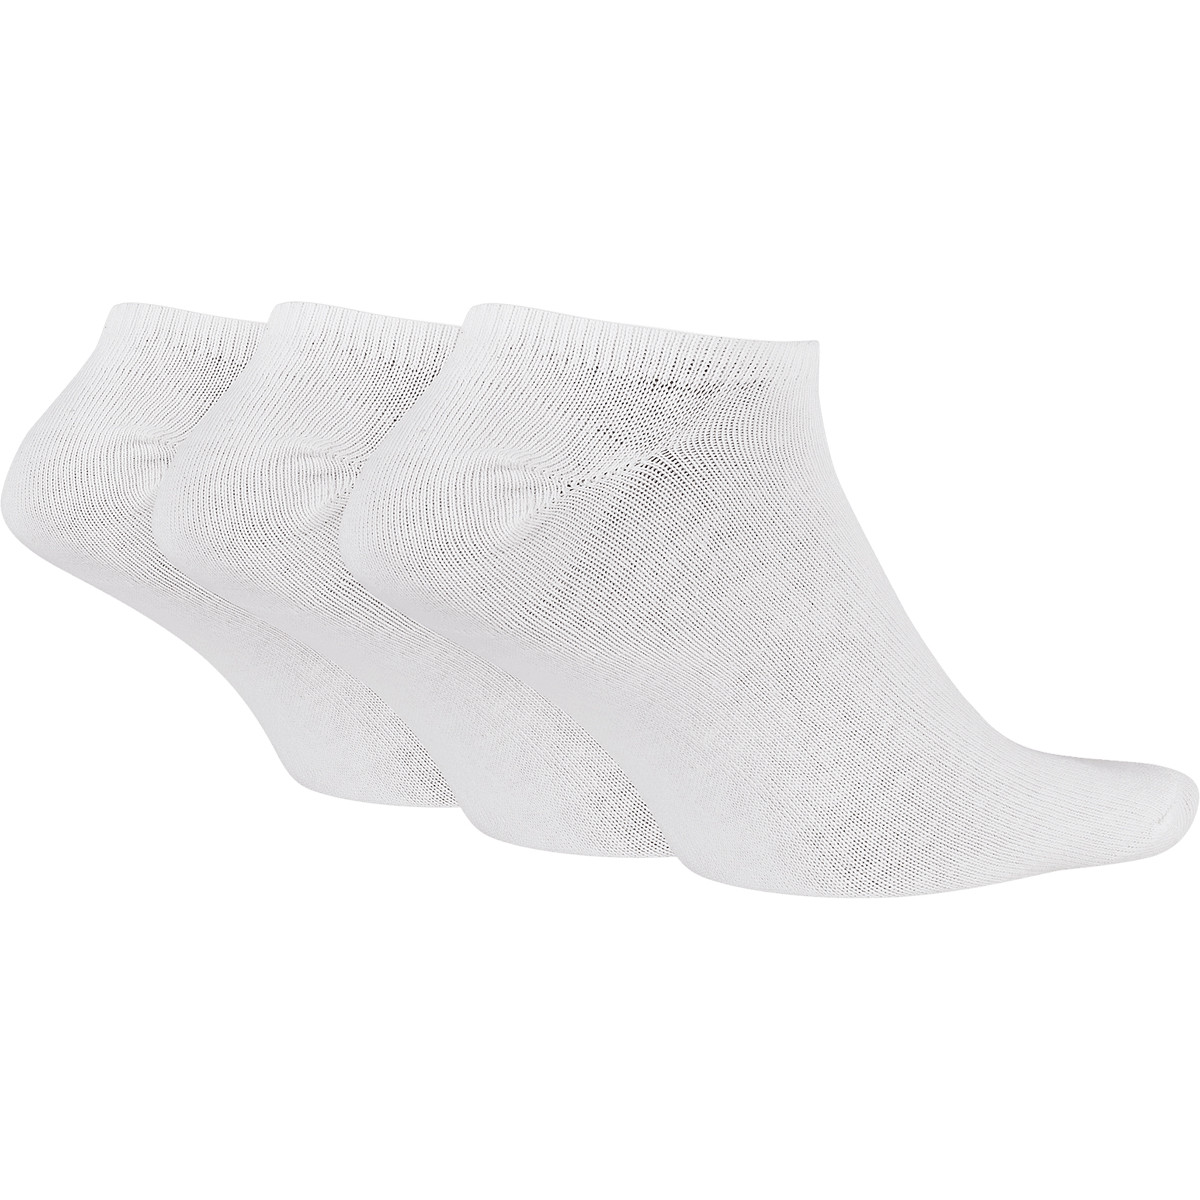 Nike, 3 Sac Invisible Chaussettes Femme, Tennis Chaussettes